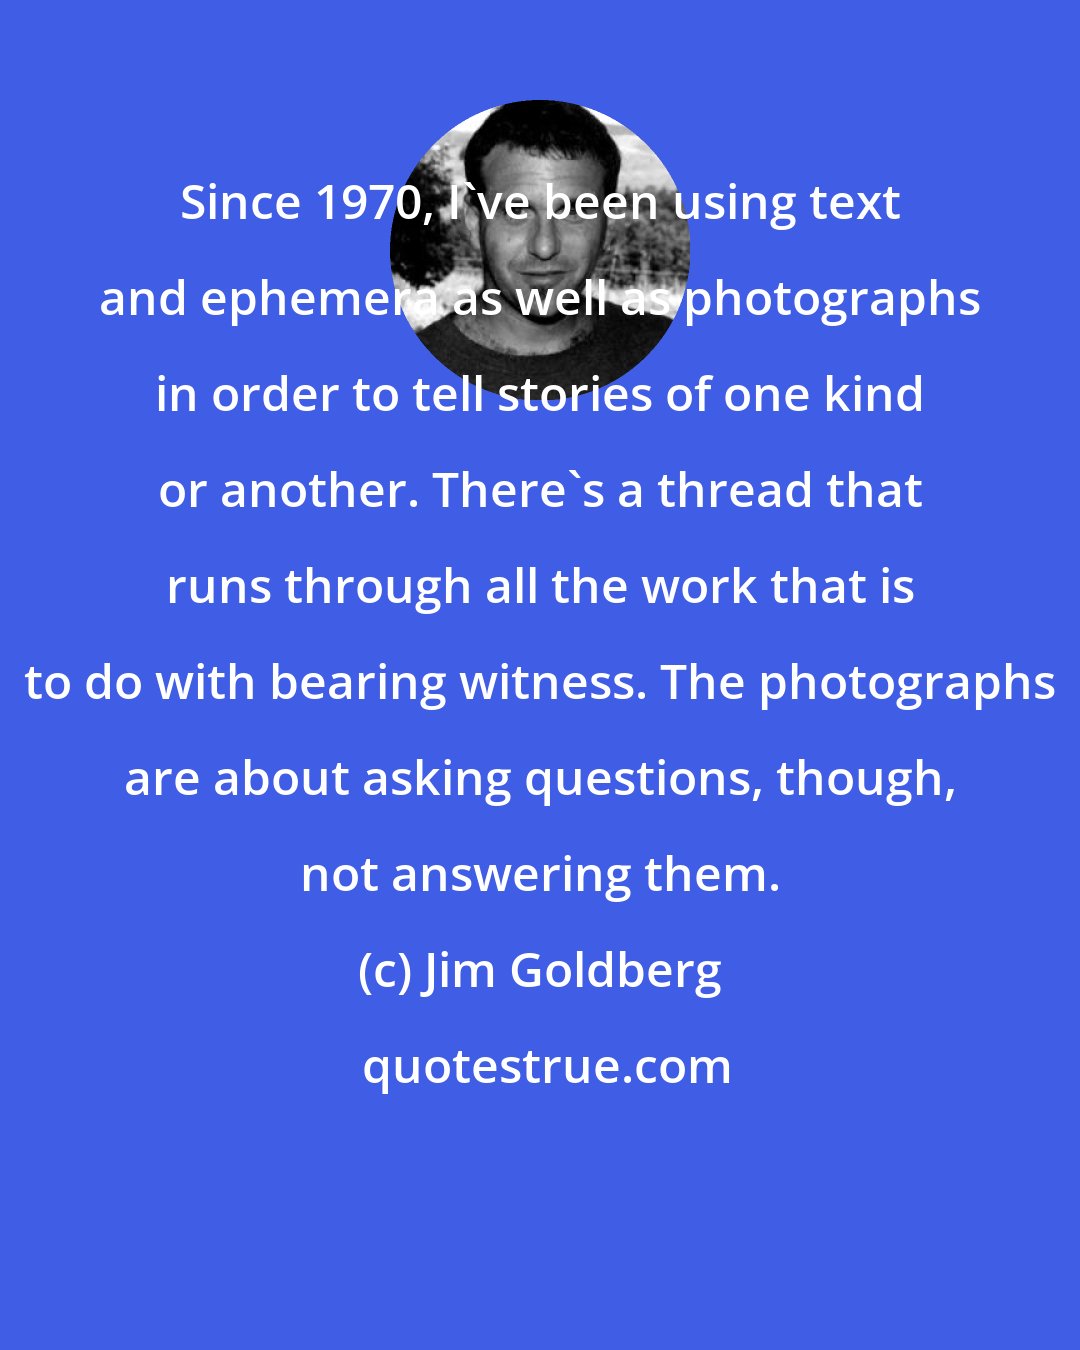 Jim Goldberg: Since 1970, I've been using text and ephemera as well as photographs in order to tell stories of one kind or another. There's a thread that runs through all the work that is to do with bearing witness. The photographs are about asking questions, though, not answering them.